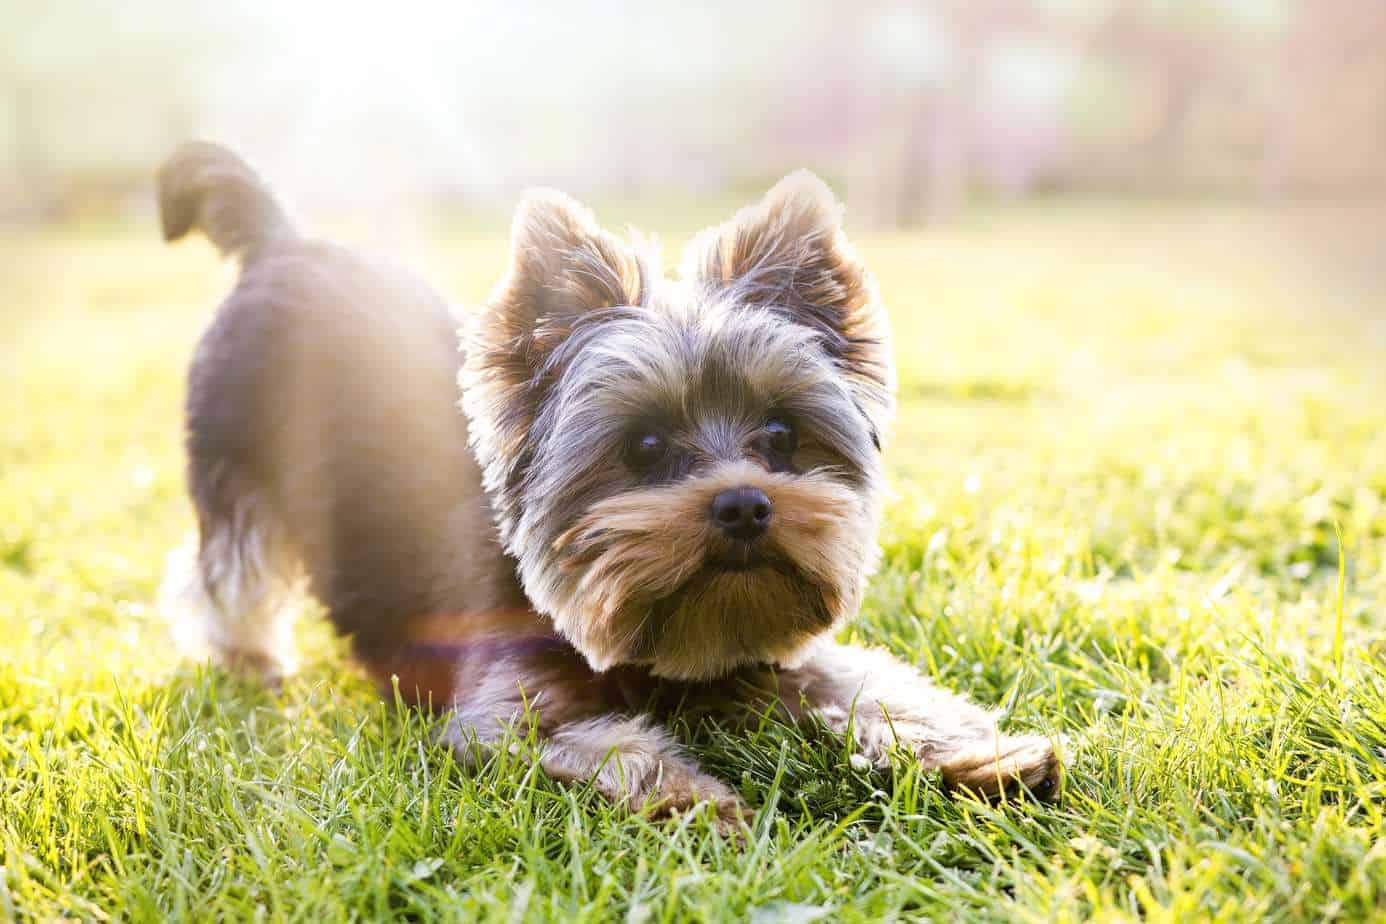 Yorkshire terrier ready to play. Common Yorkshire terrier health problems: Bad knees, skin allergies, retinal dysplasia, collapsed tracheas and more.